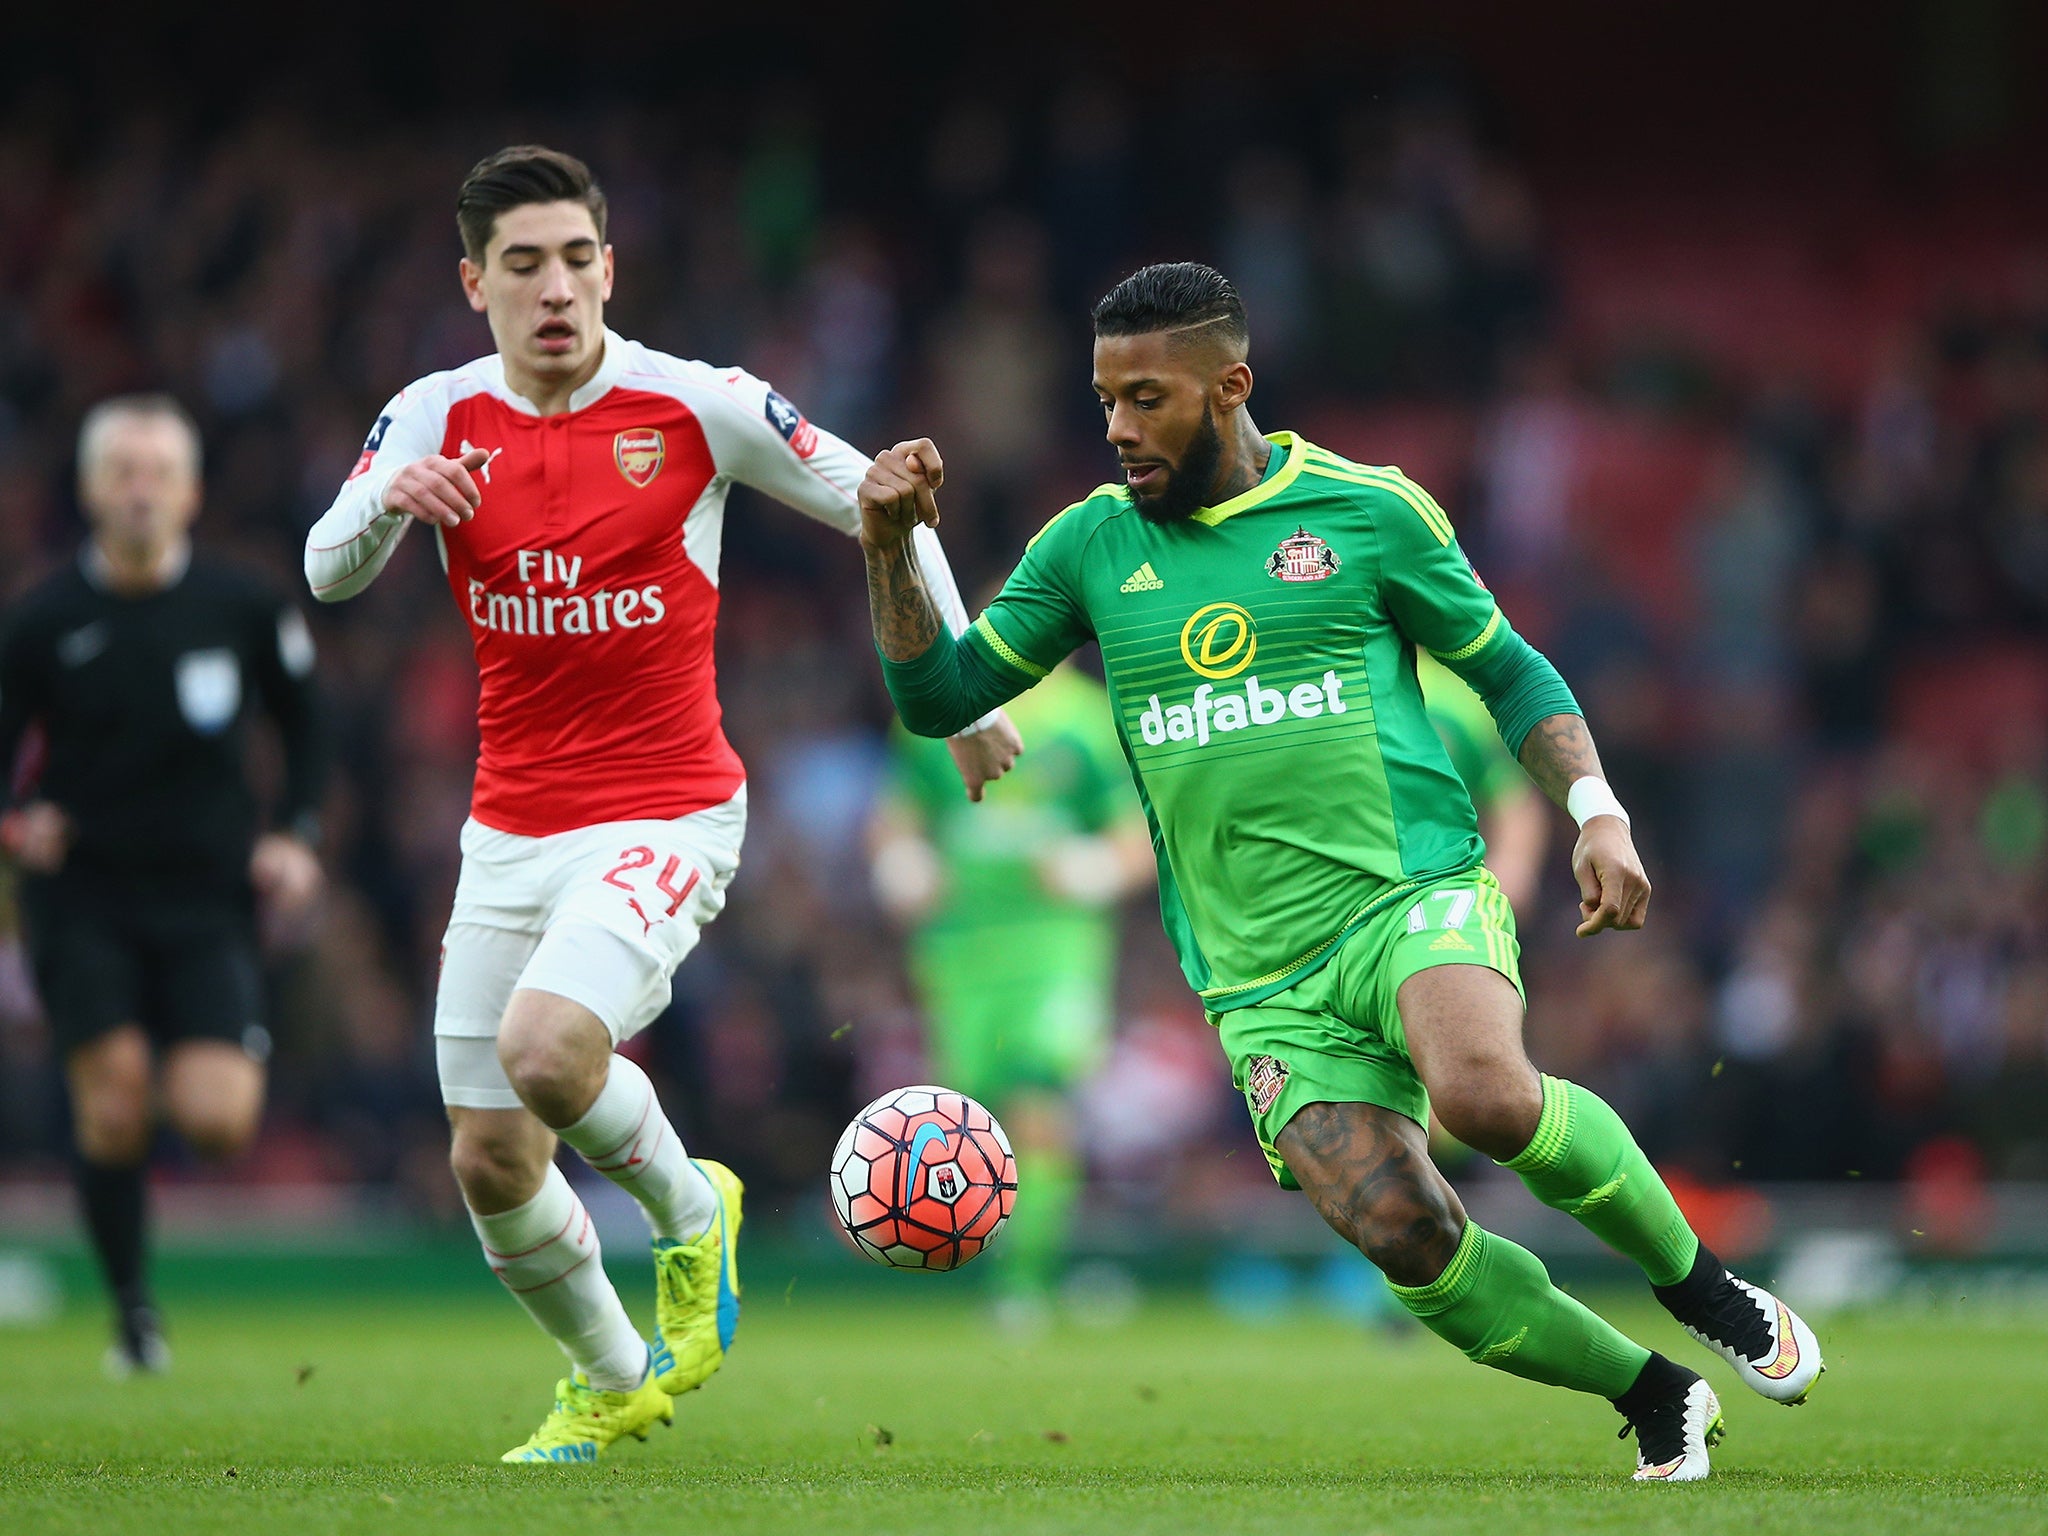 Jeremain Lens takes the ball past Hector Bellerin